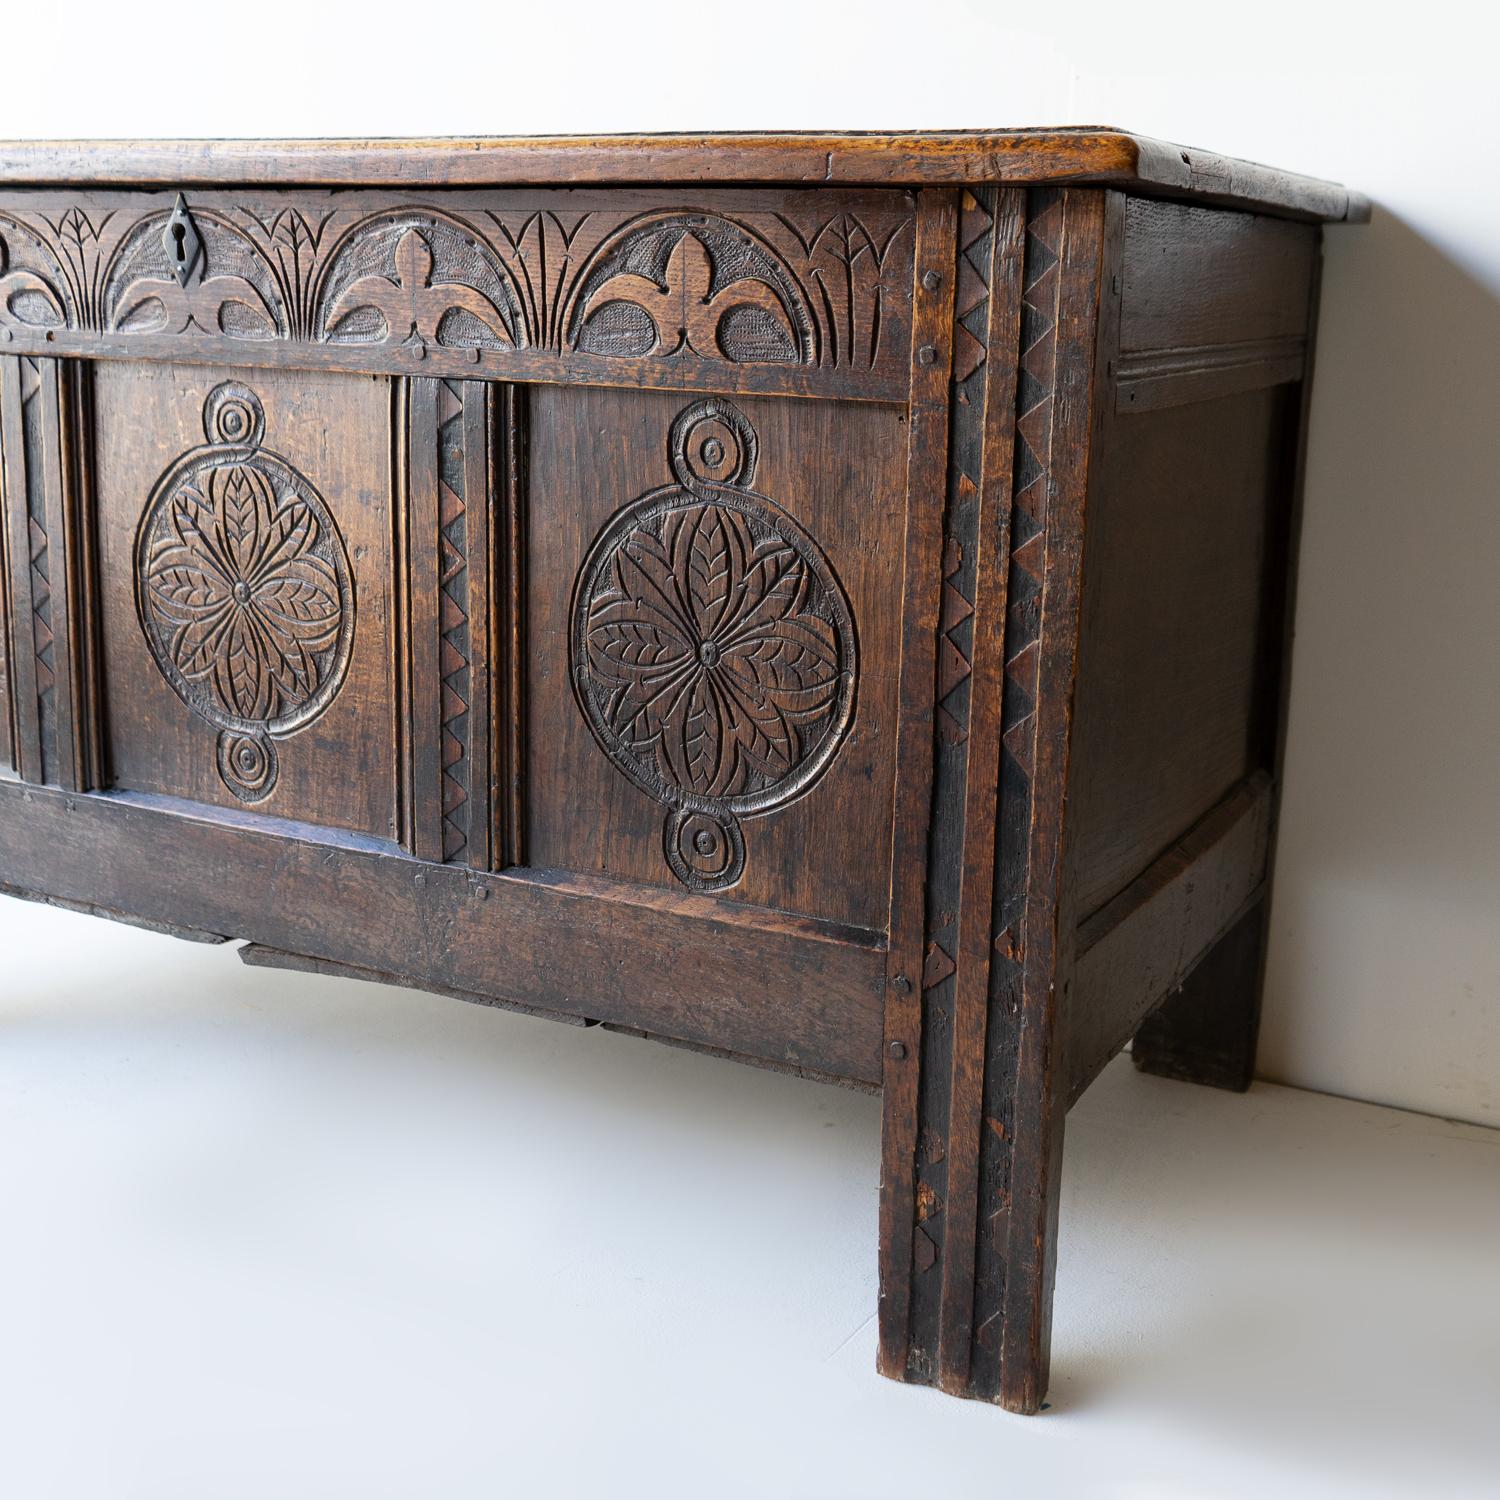 Antique Charles II West Country Carved Oak Coffer 17th Century Blanket Box Chest For Sale 1